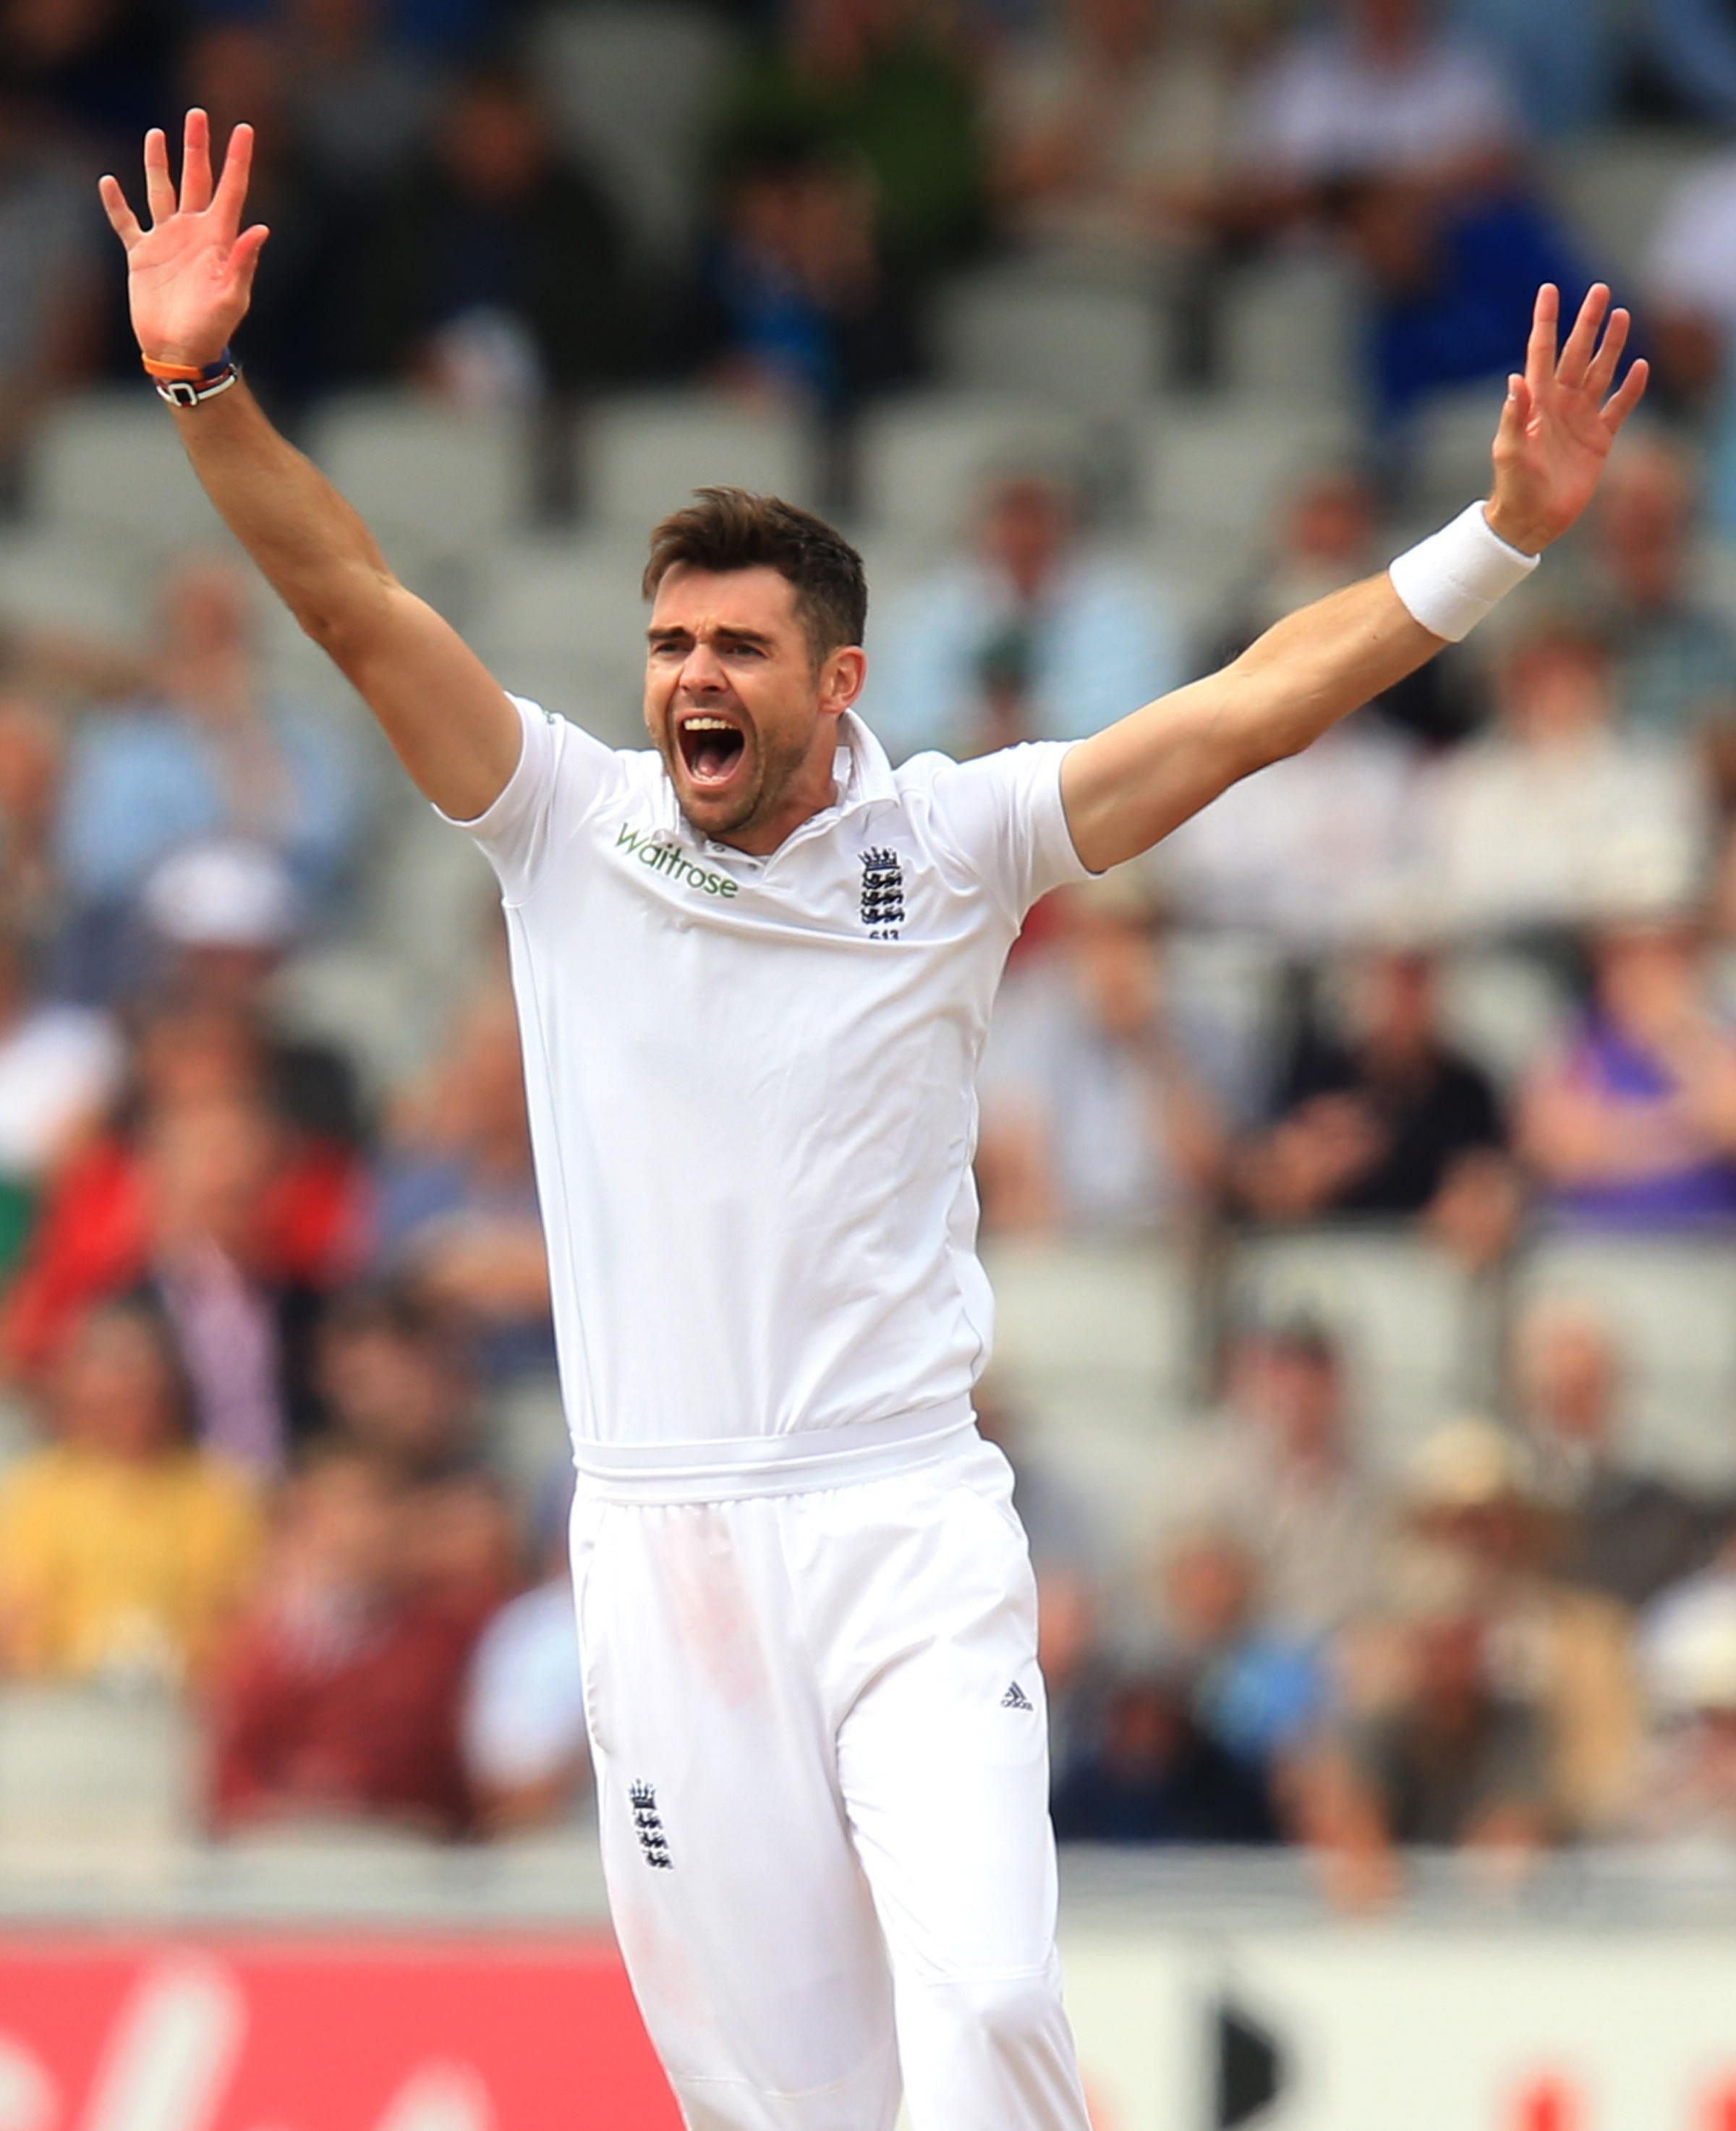 England ace James Anderson could have been snooker star